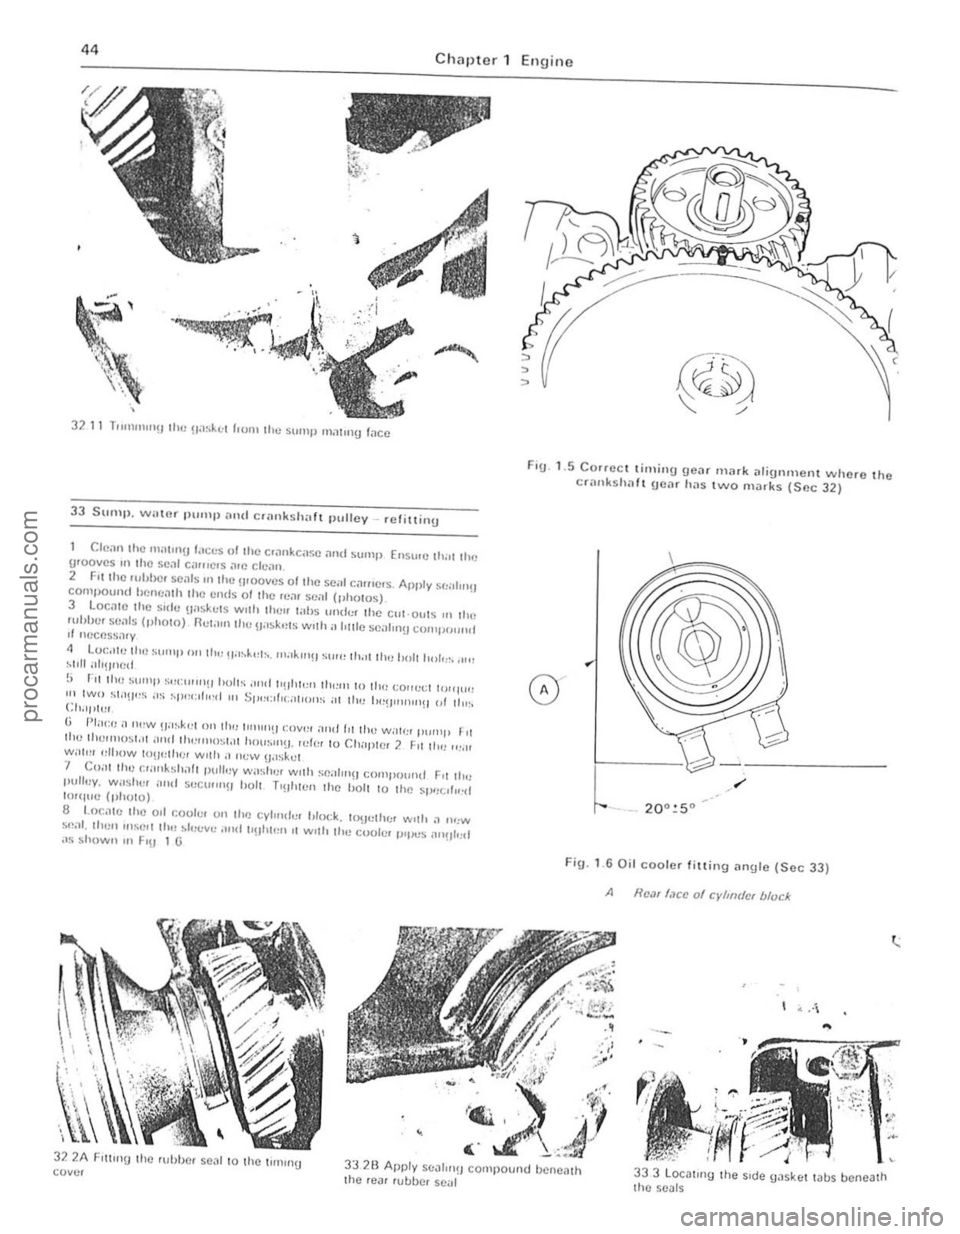 FORD CAPRI 1974 Service Manual  
) 
.... ---= 
44 C hapter  1 Engine 
32 11 TUUHU" !J the !la~~(:1 "(11ll Ihe sump m.ll11Y face 
33 SIII11I ), wal n r 11111111 and  cr<1l1ksh "ft pullev _  relil1inU 
Ch!all the 1II:11111U I;ICcs